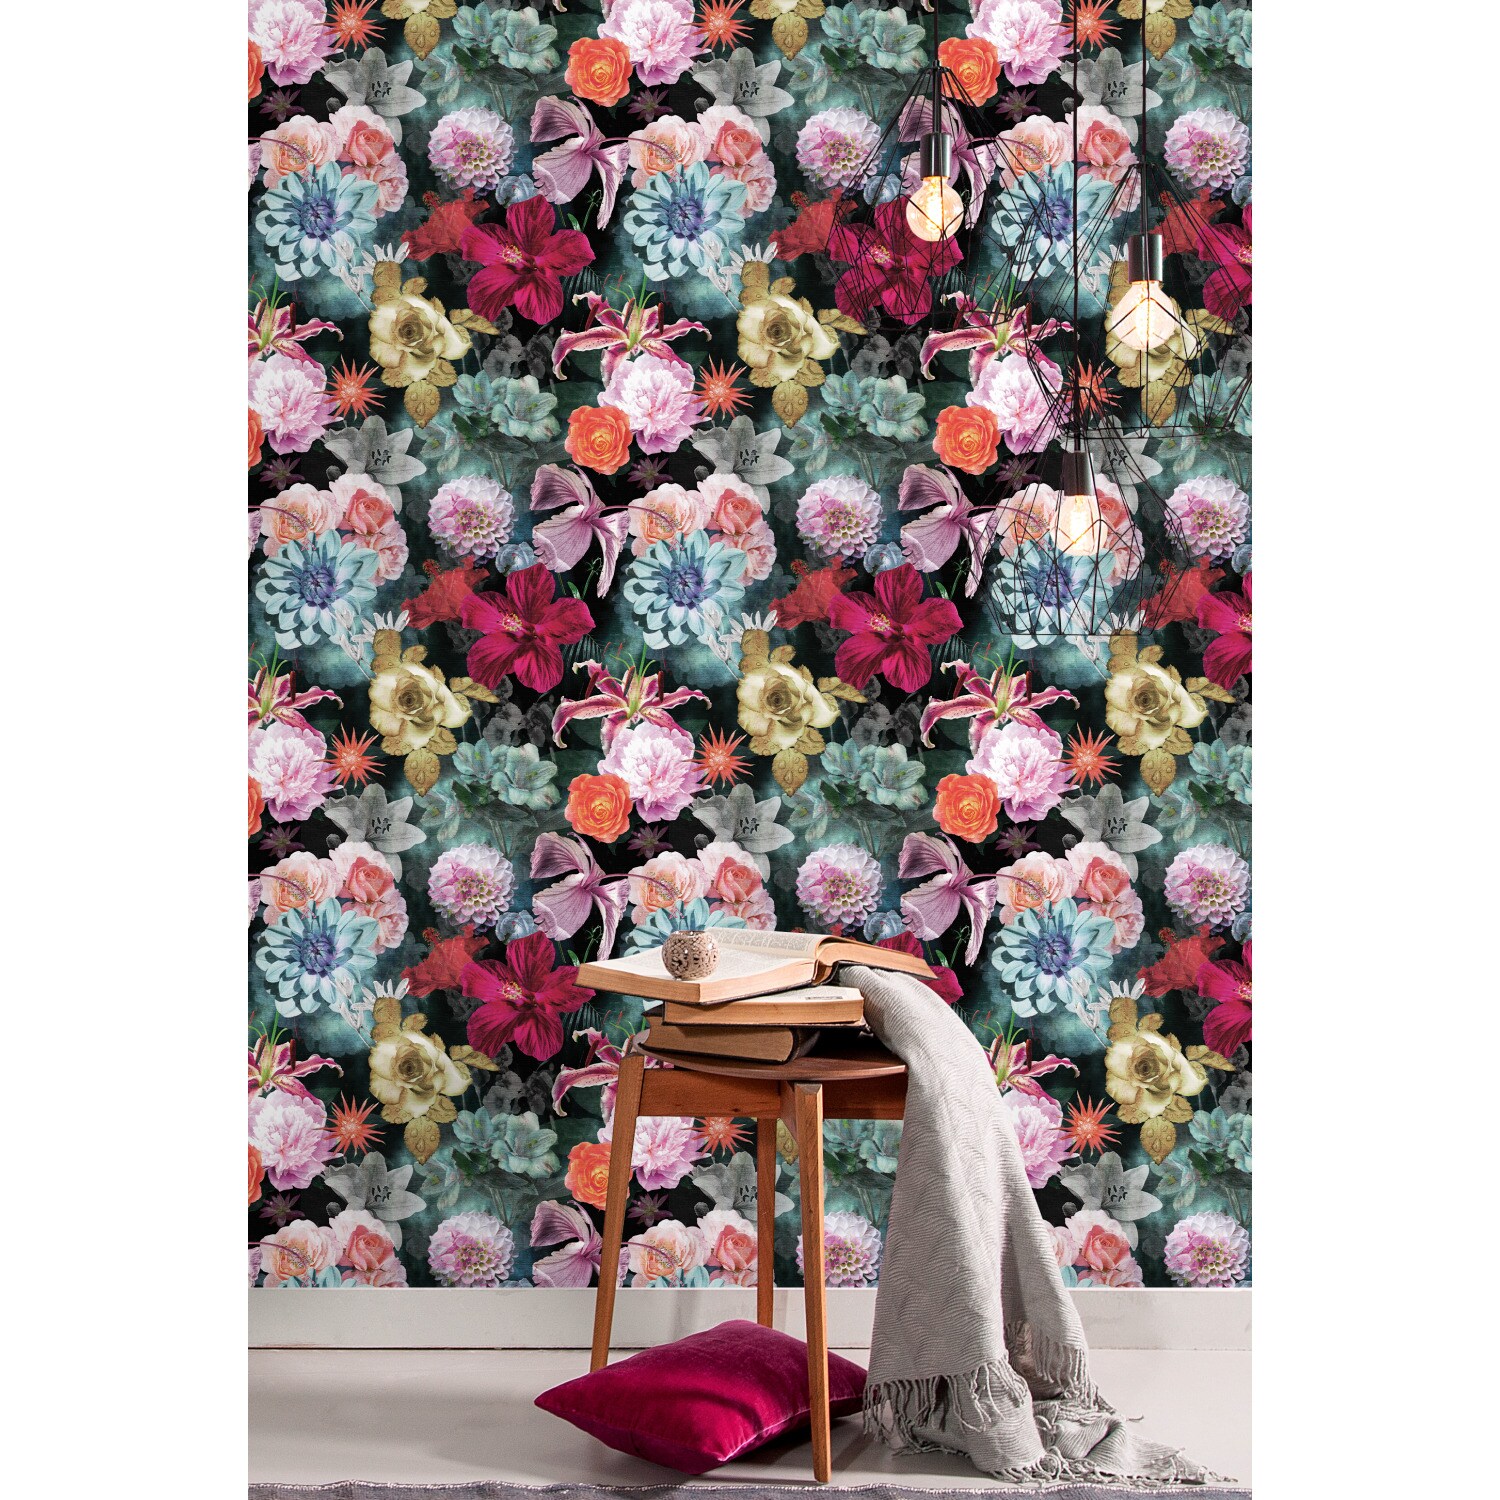 RoomMates 28.29-sq ft Red Vinyl Floral Self-adhesive Peel and Stick ...